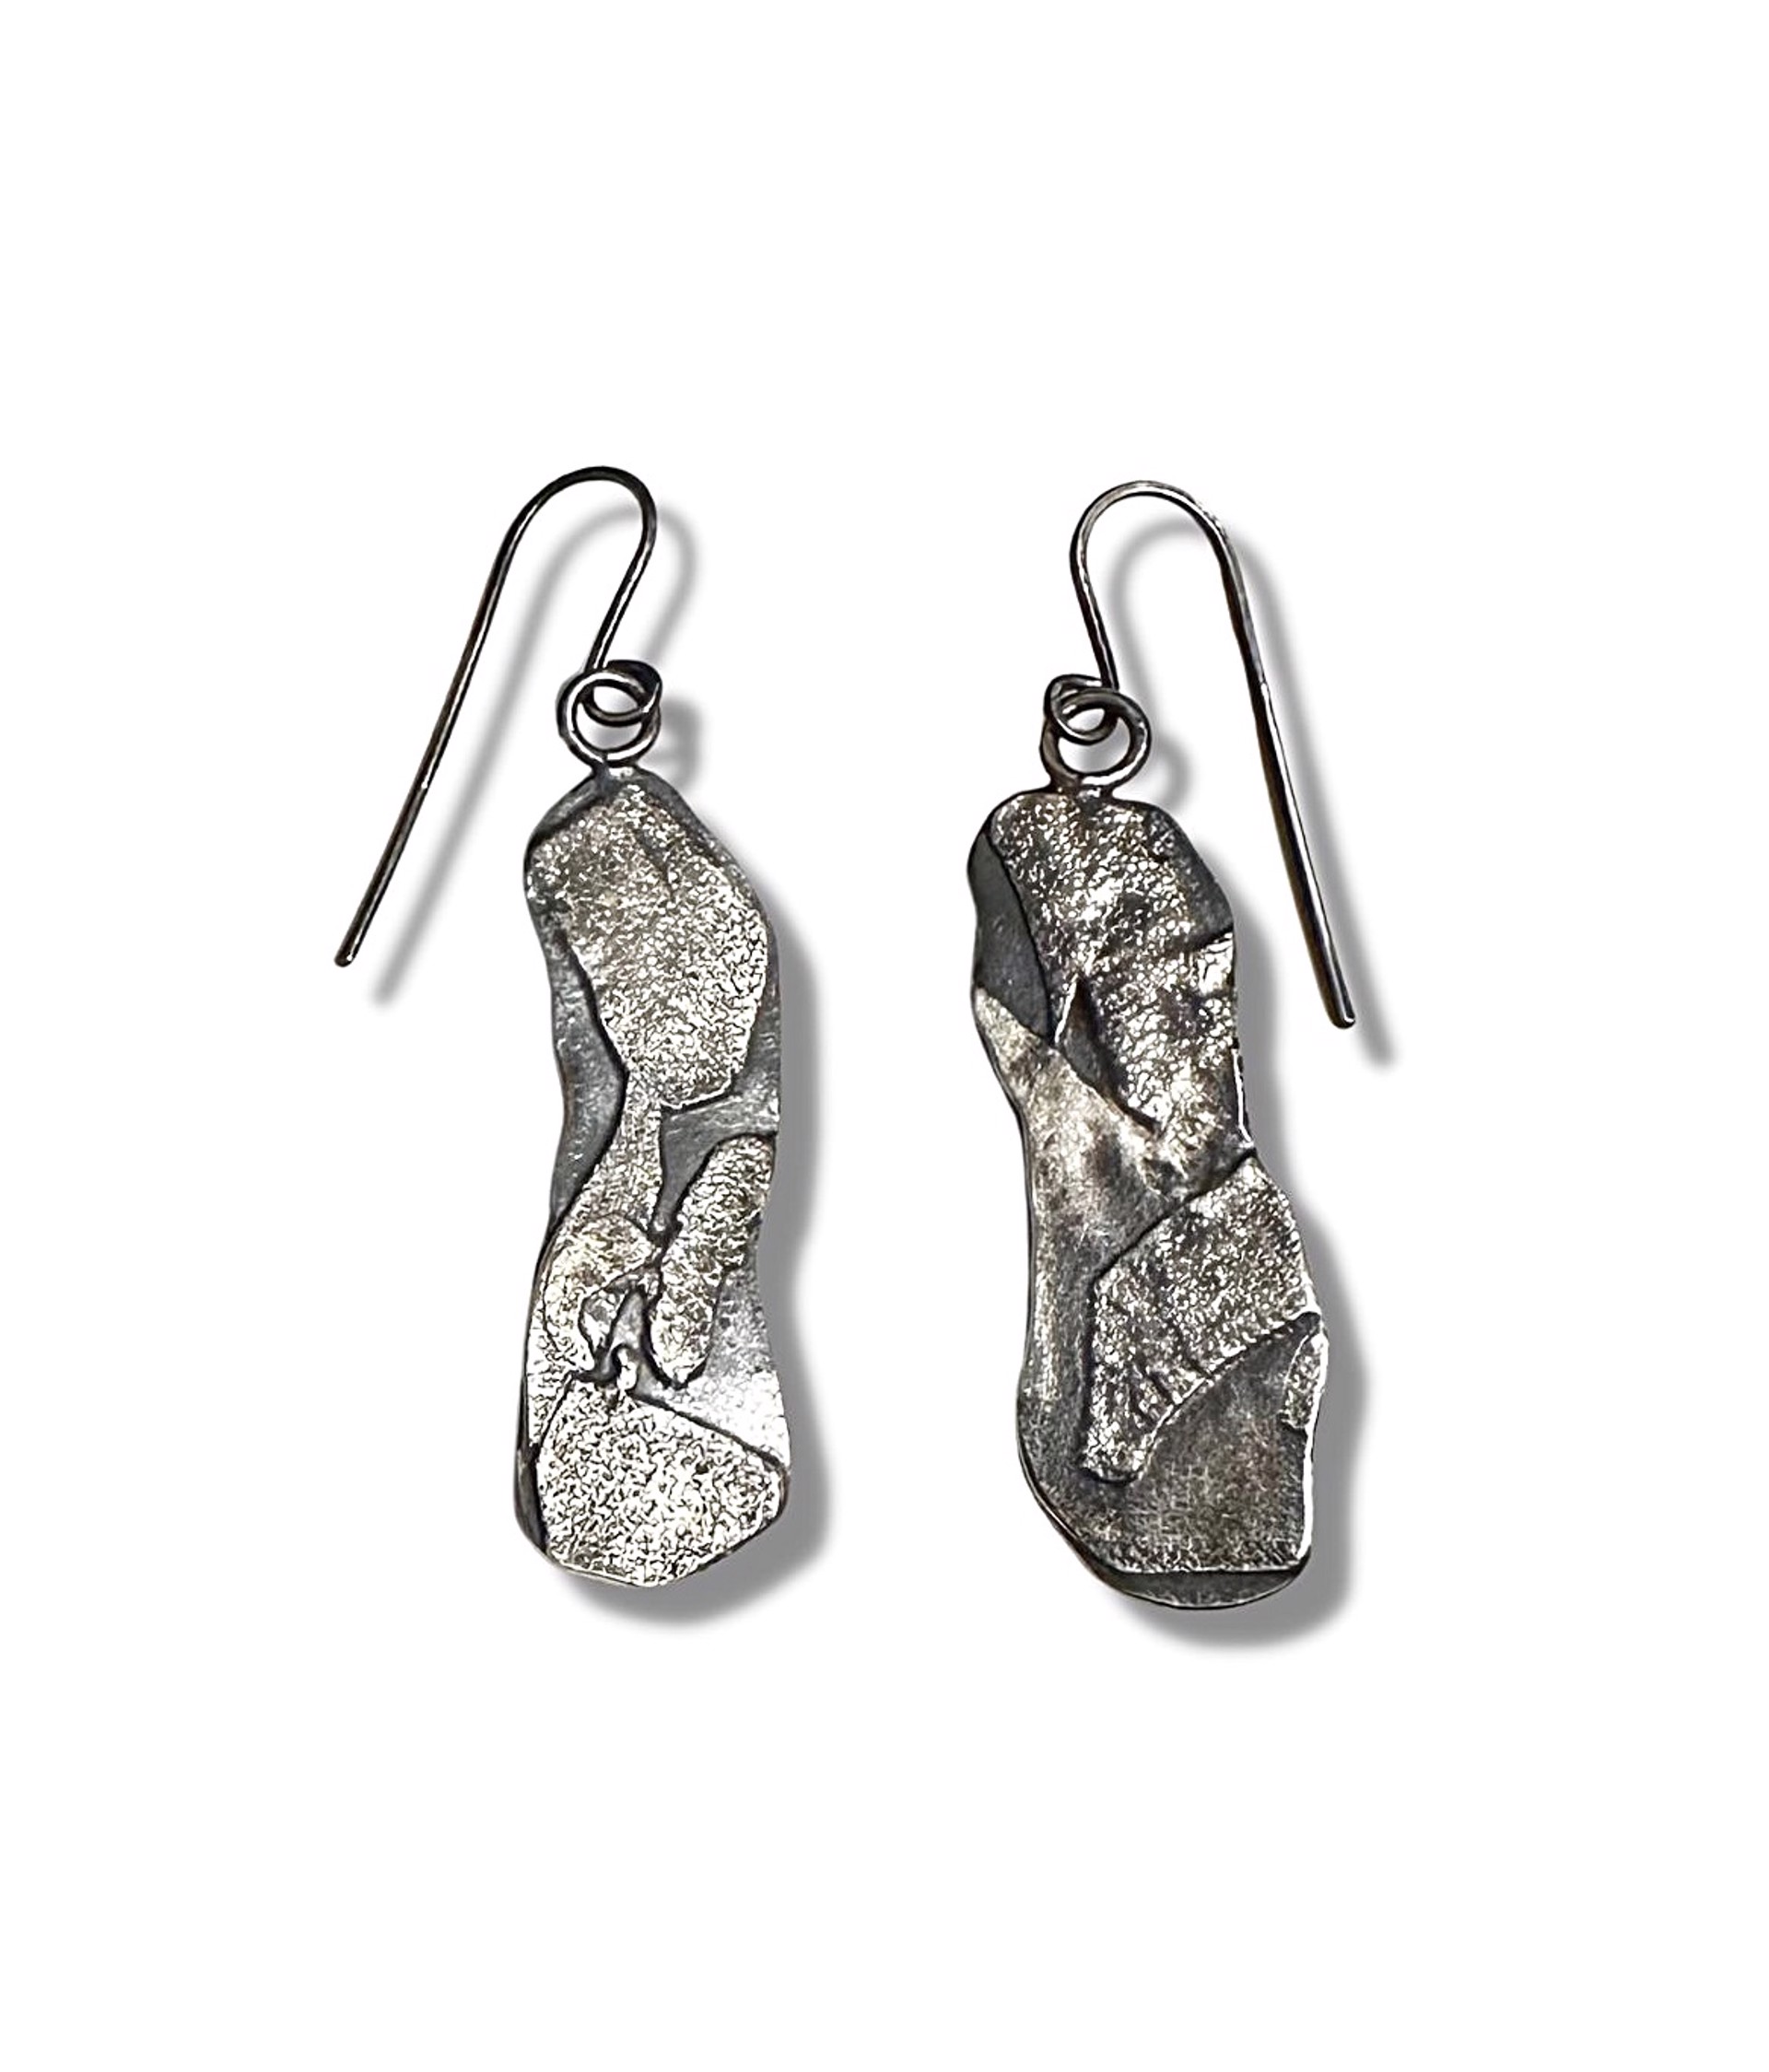 Earrings - "Coastal Ebb": Sterling Silver Fusion AC 327 by Annette Campbell